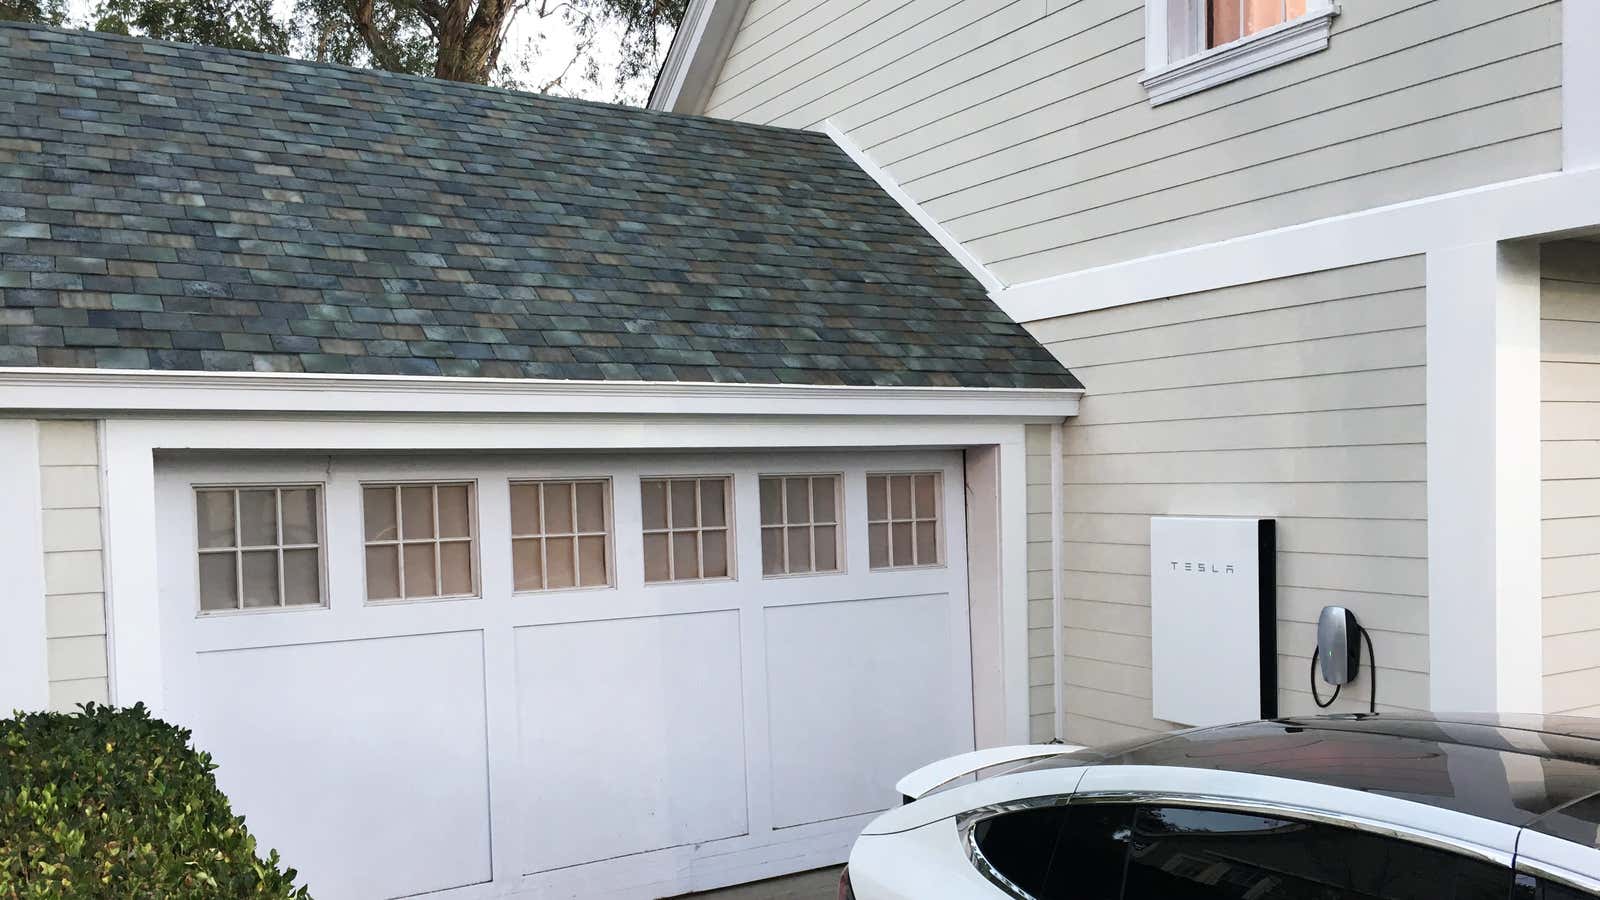 Tesla’s solar roof tiles are coming to Texas.